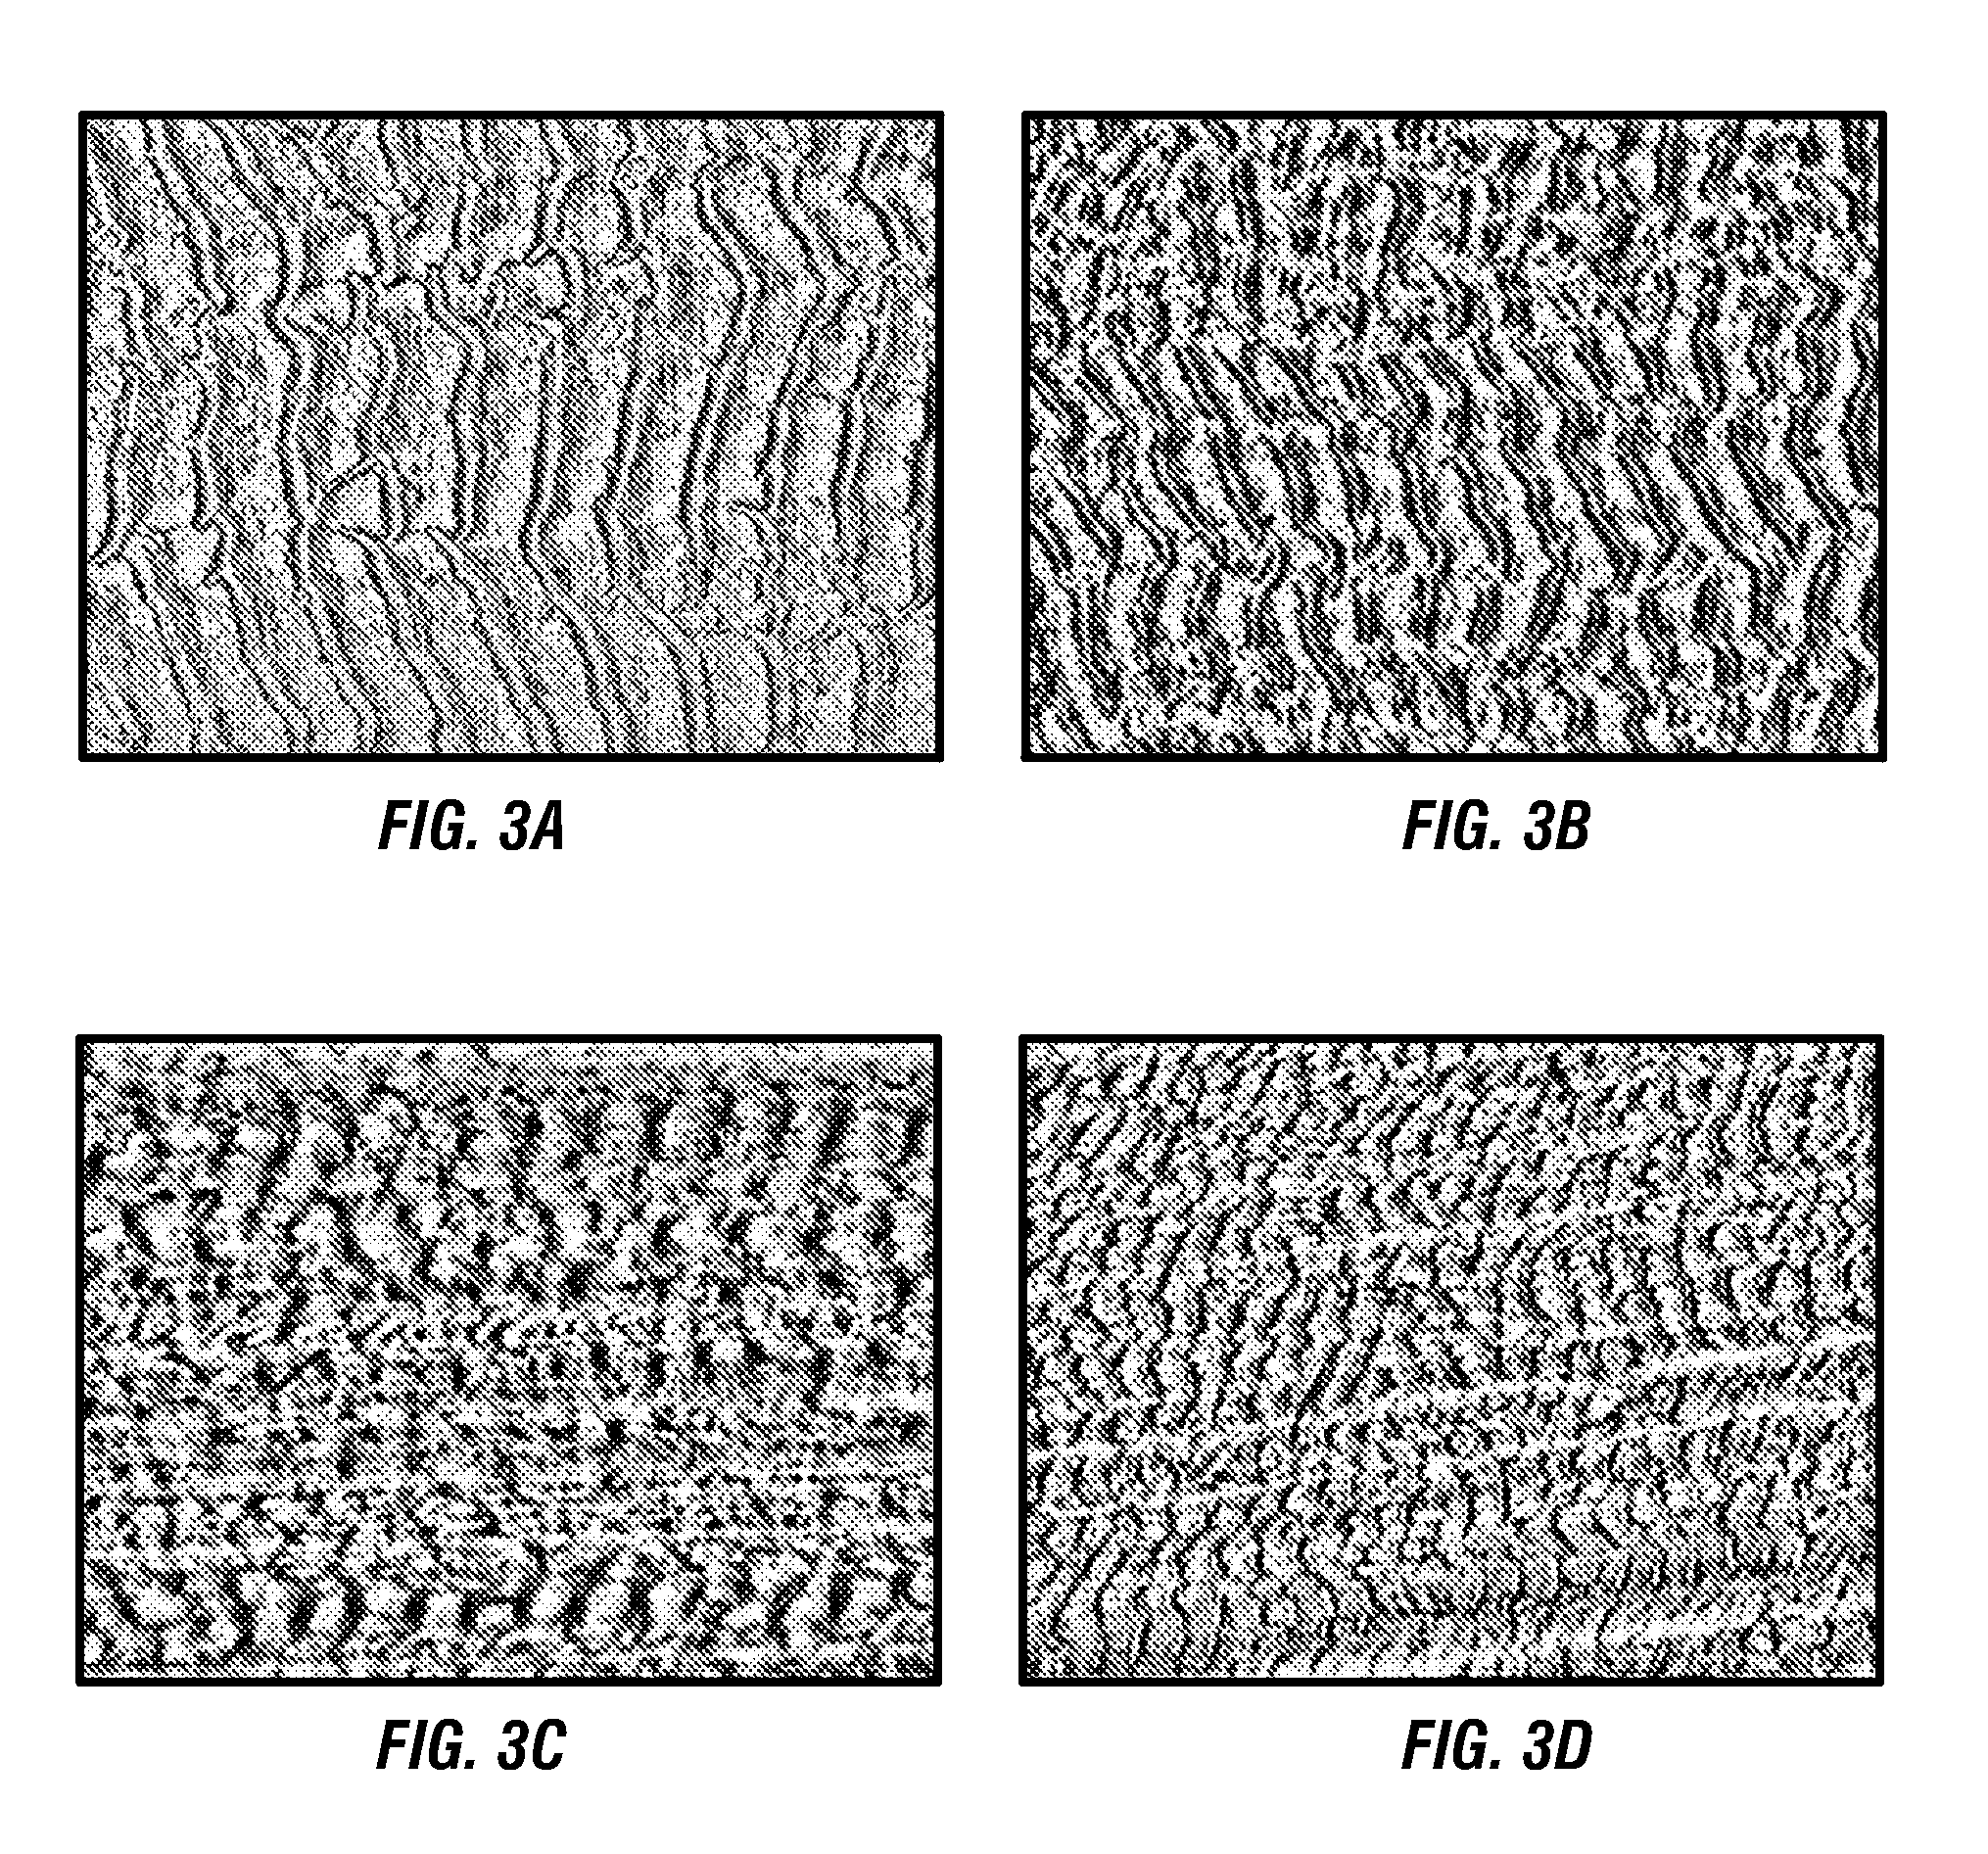 Crosslinked polyethylene articles and processes to produce same